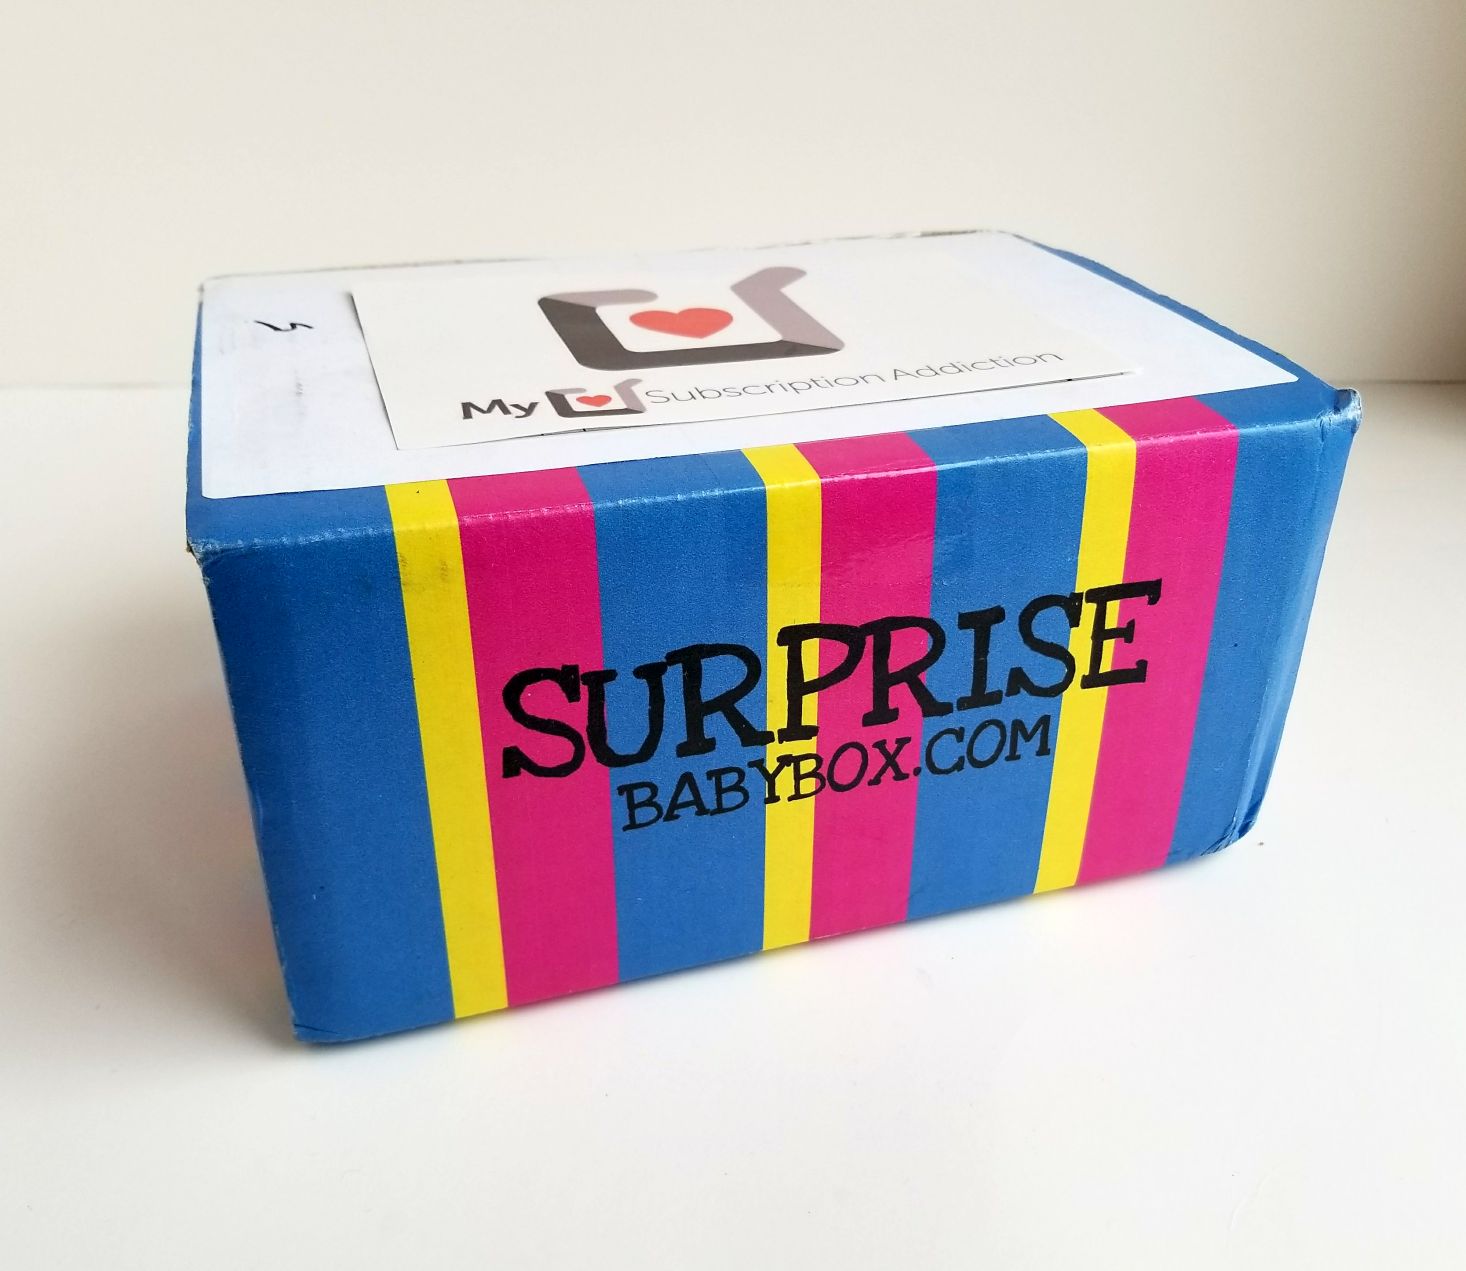 Surprise Baby Box Subscription Review + Coupon – February 2018